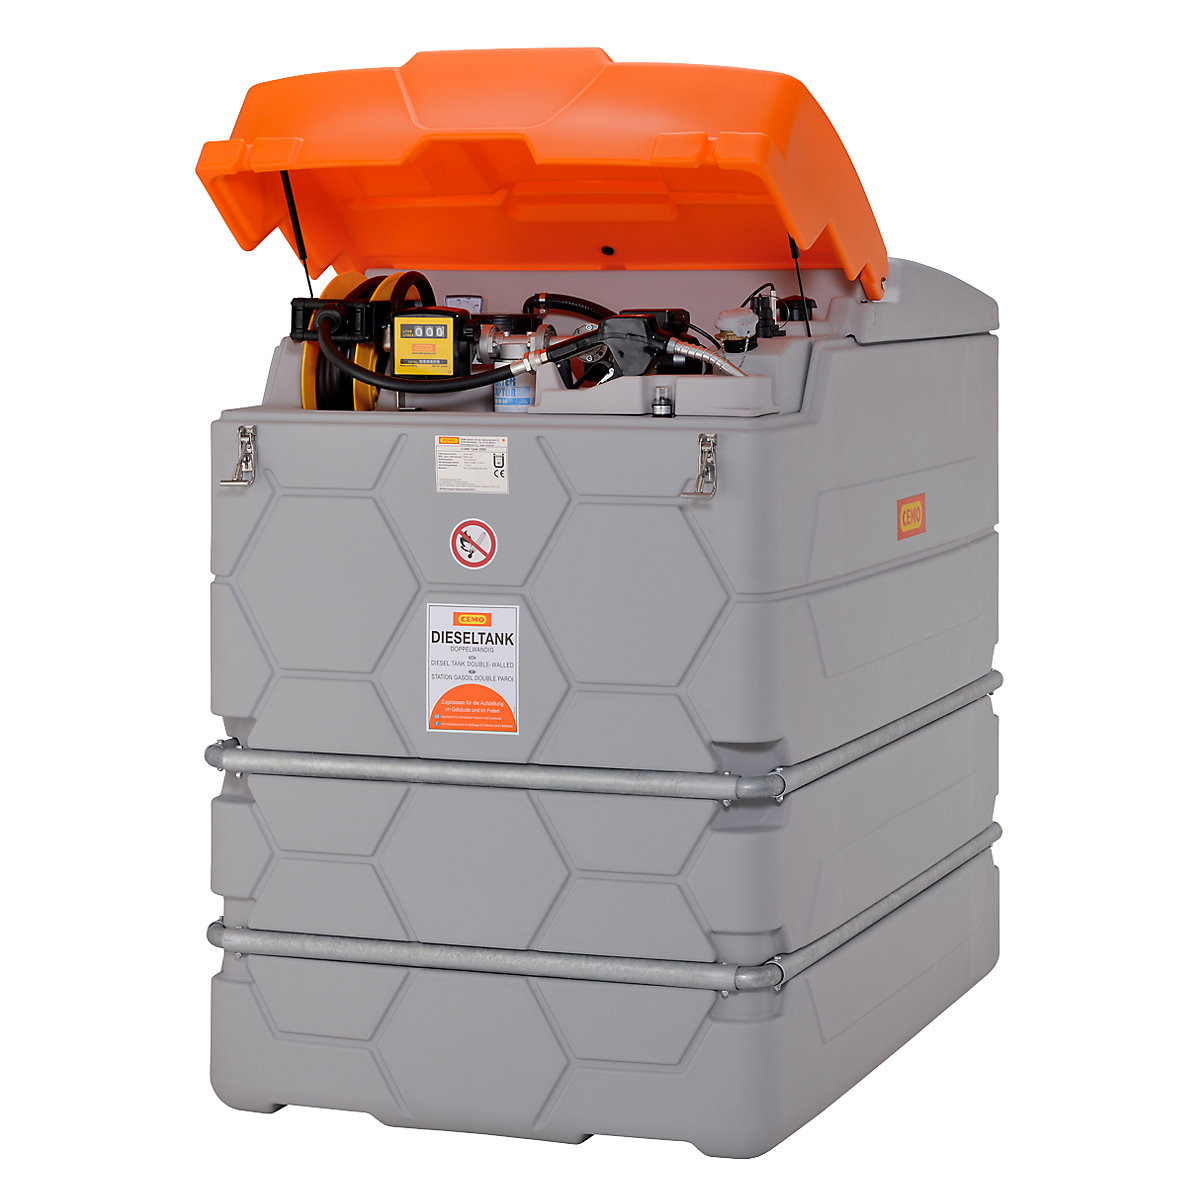 CUBE diesel tank – CEMO, Outdoor Premium, capacity 2500 l, with electric pump 72 l/min-10